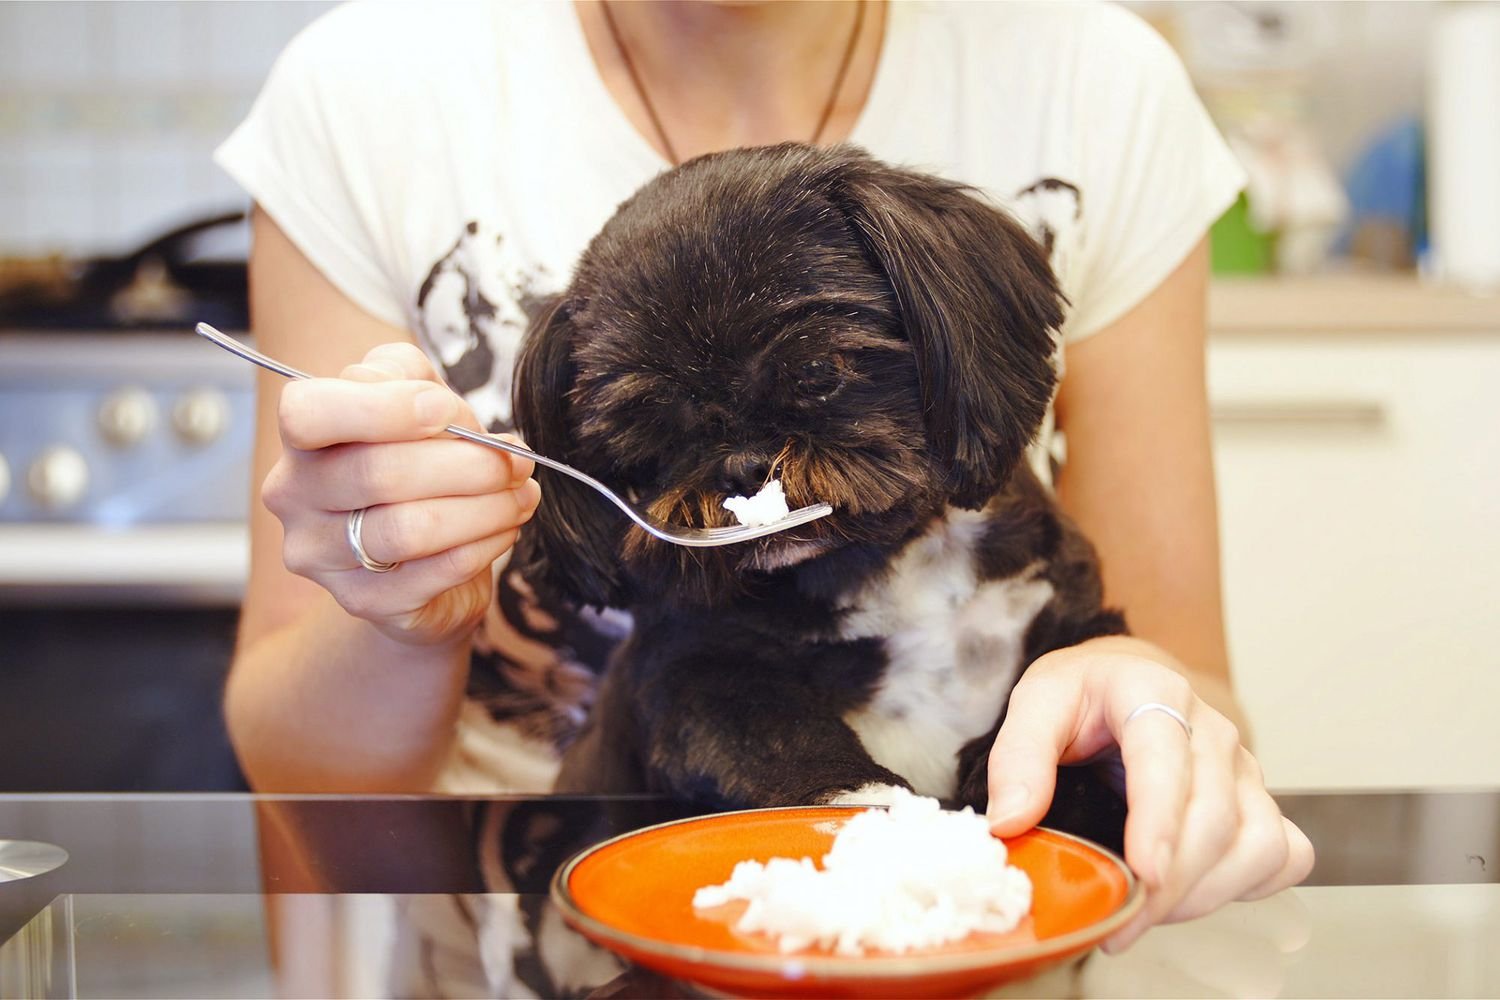 Can Dogs Eat Rice? A Pet Nutrition Specialist Weighs In